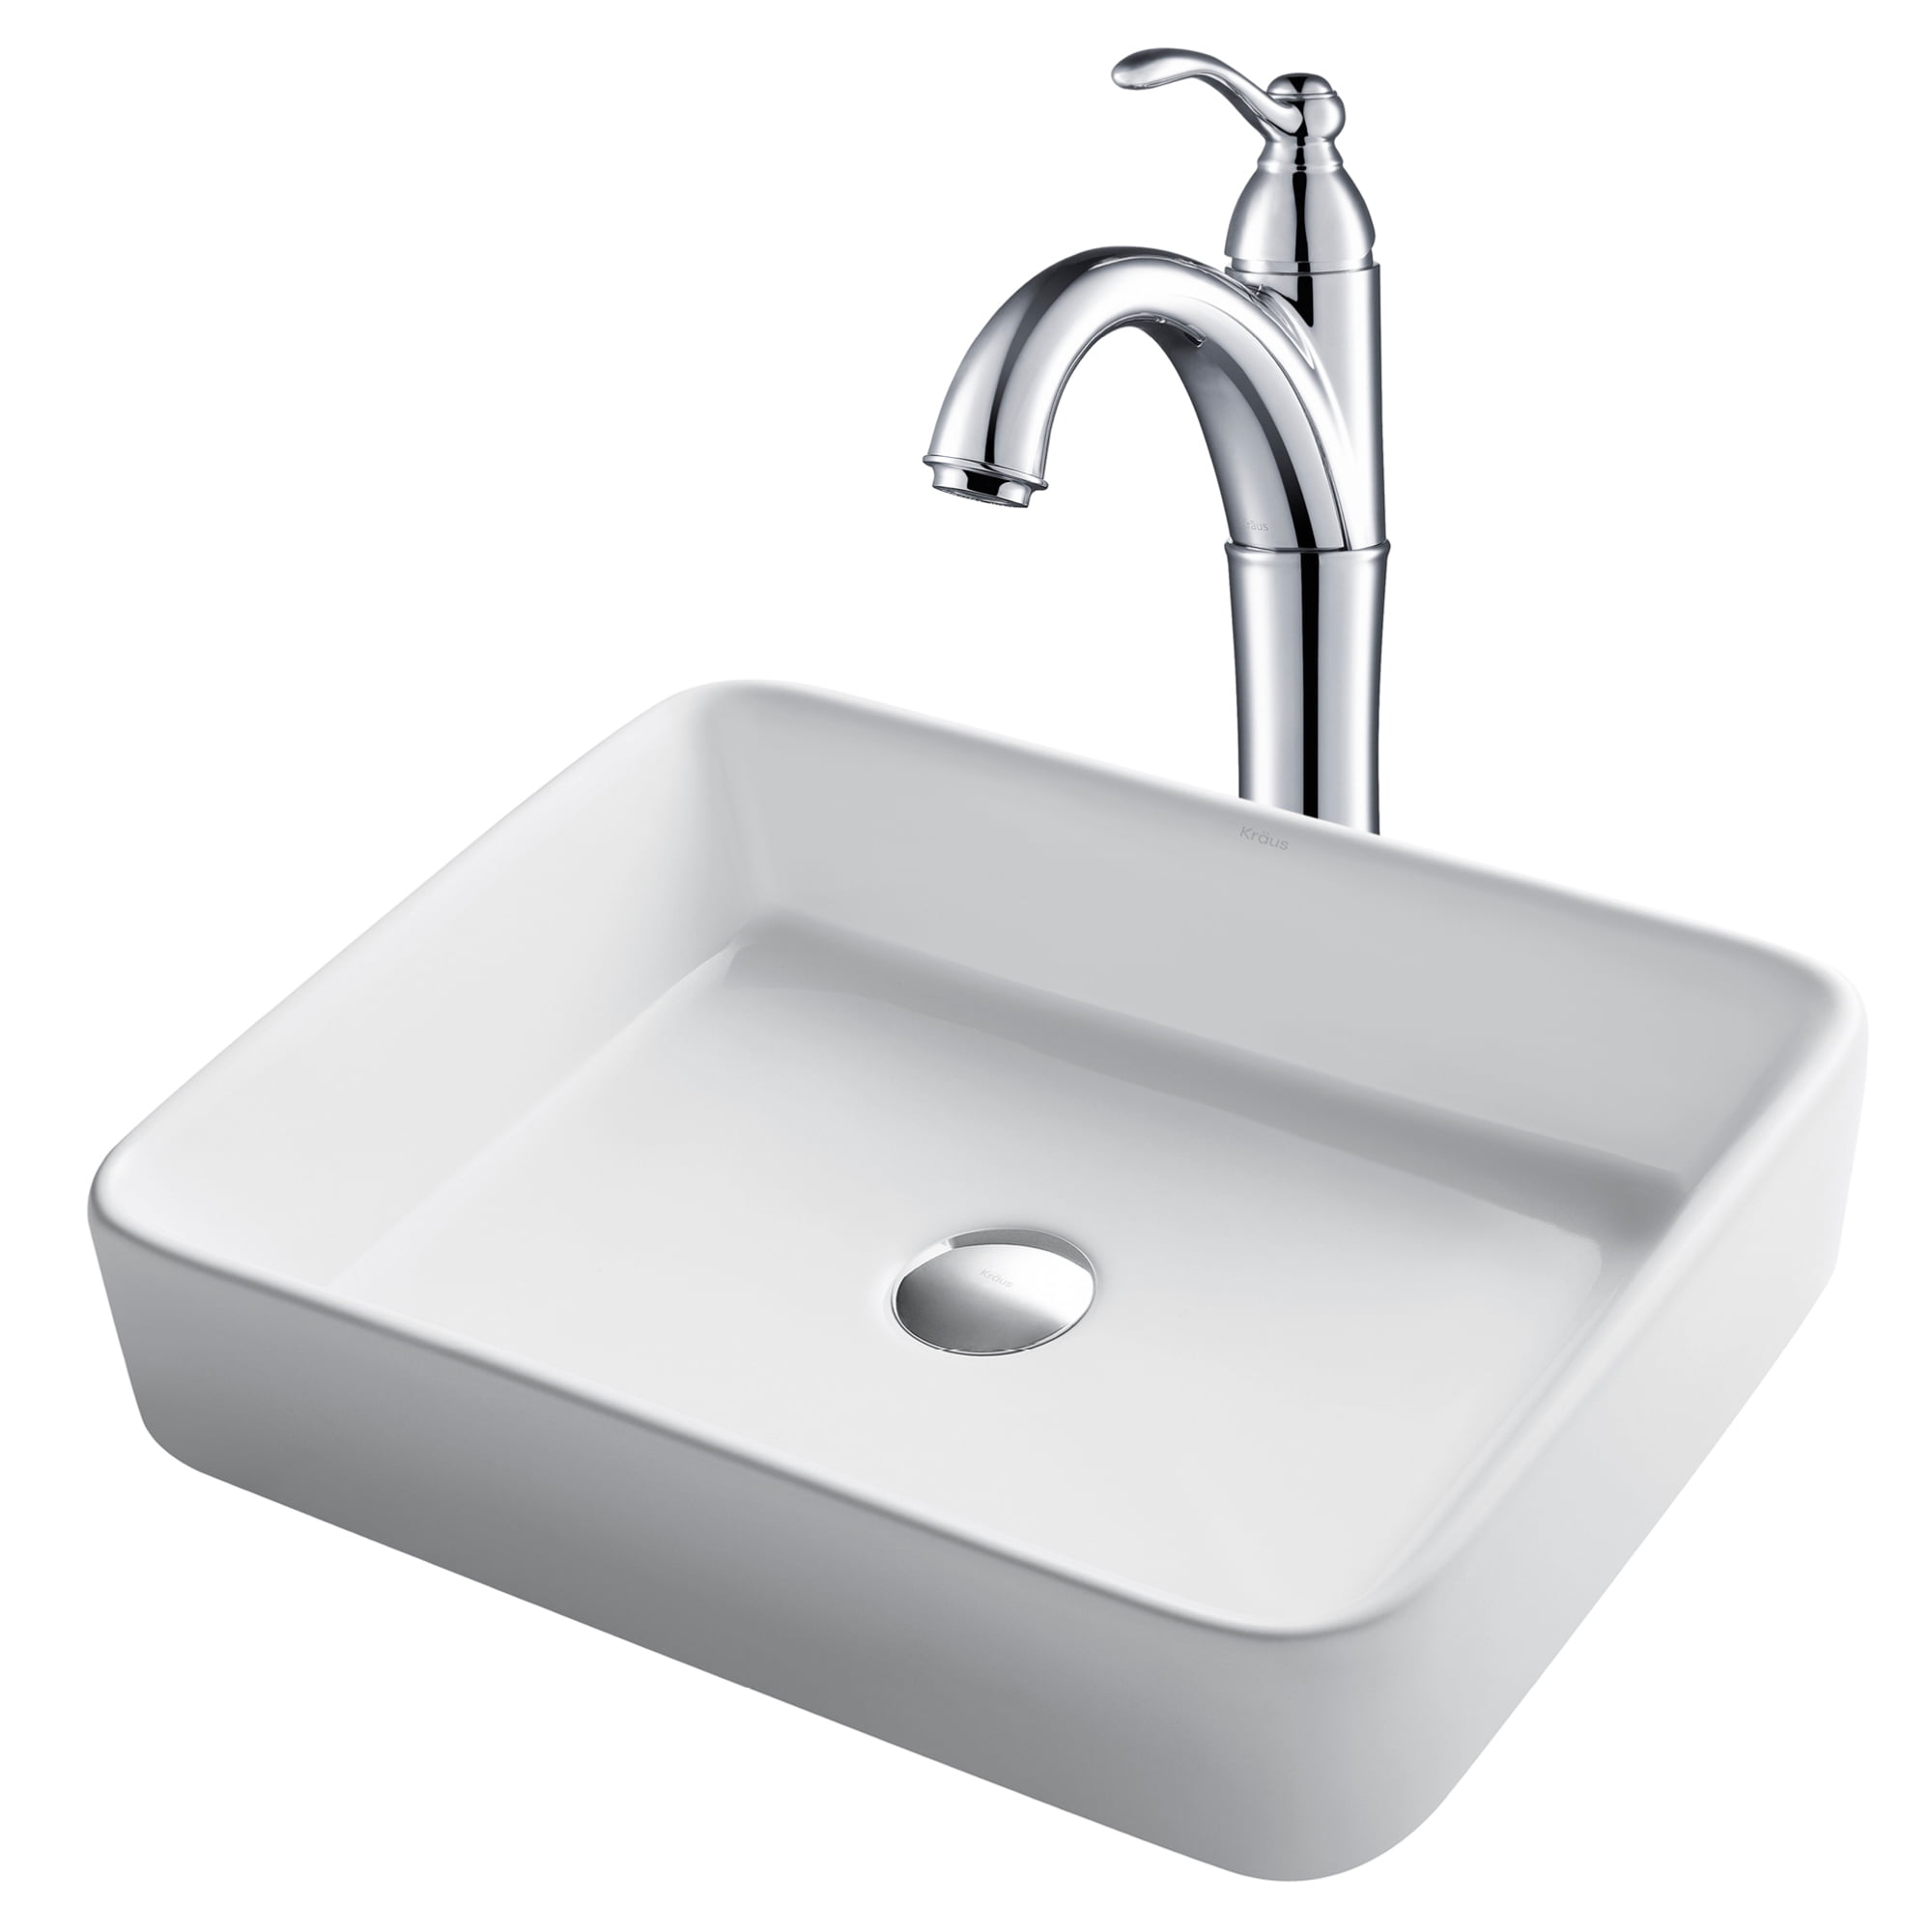 Kraus 19 Inch Modern Rectangular White Porcelain Ceramic Bathroom Vessel Sink And Riviera Faucet Combo Set With Pop Up Drain